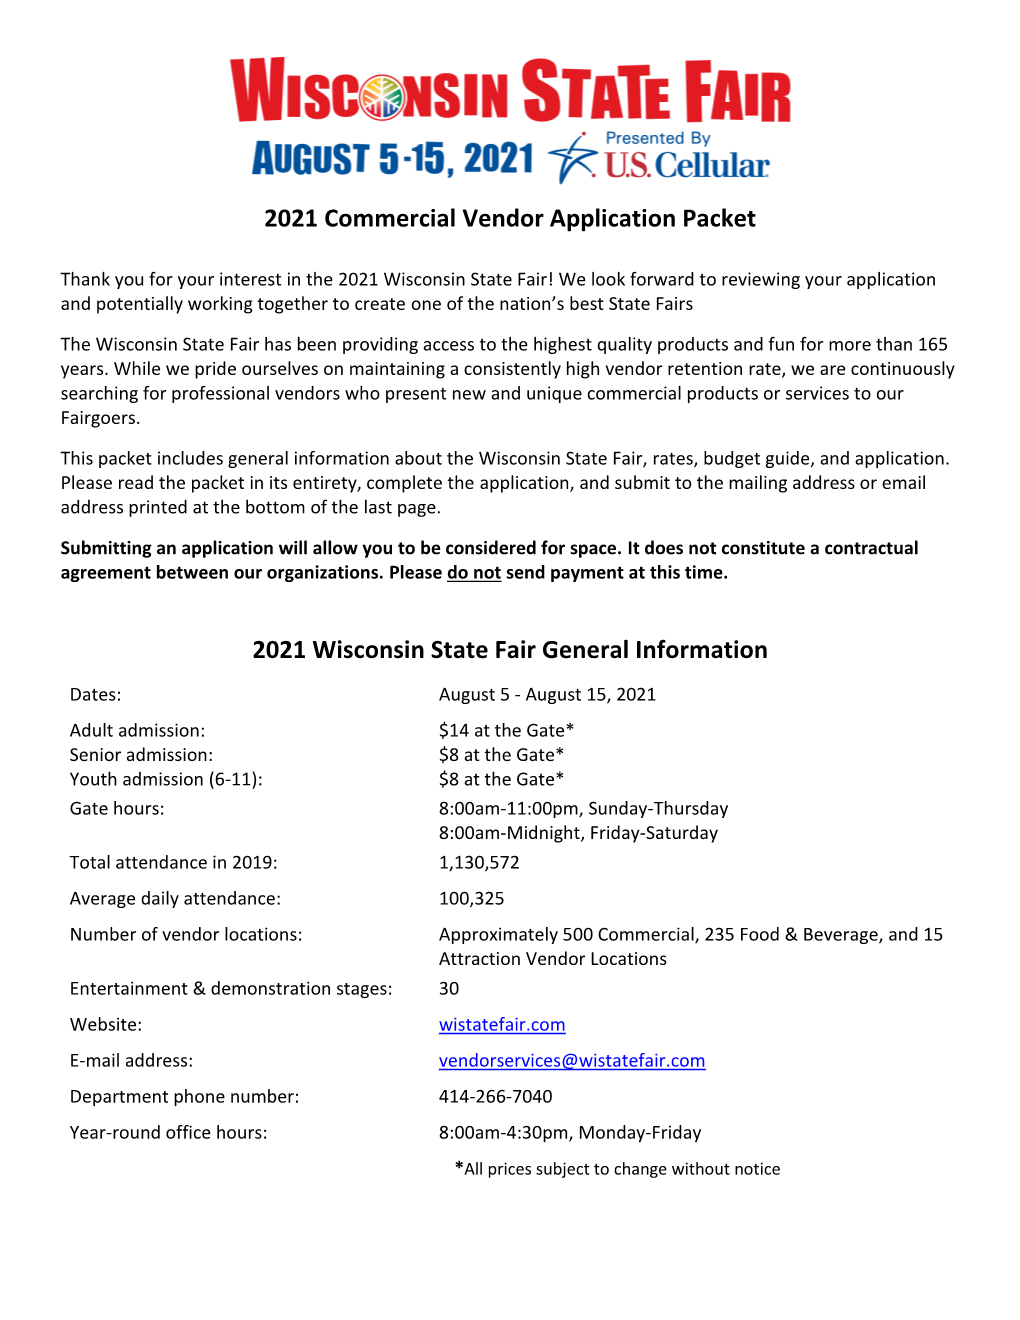 2021 Commercial Vendor Application Packet 2021 Wisconsin State Fair